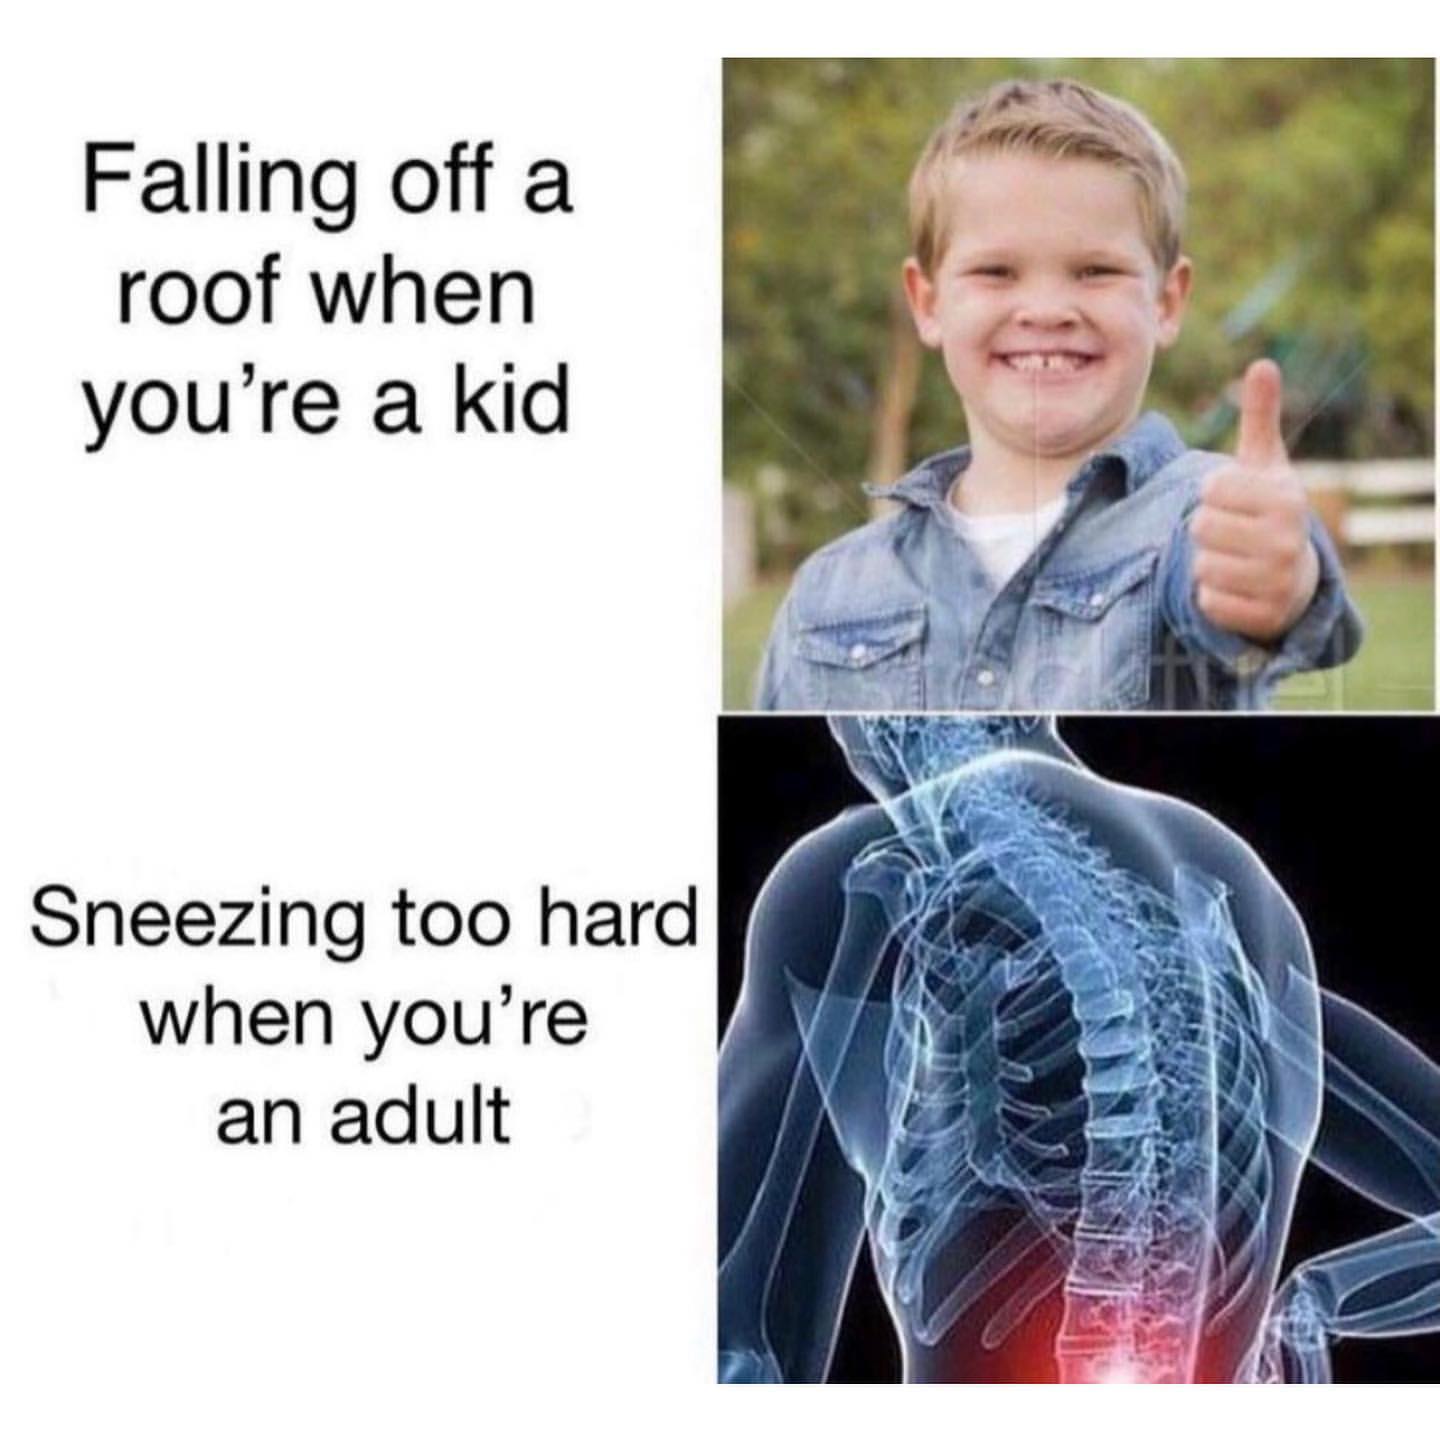 Falling off a roof when you're a kid. Sneezing too hard when you're an adult.